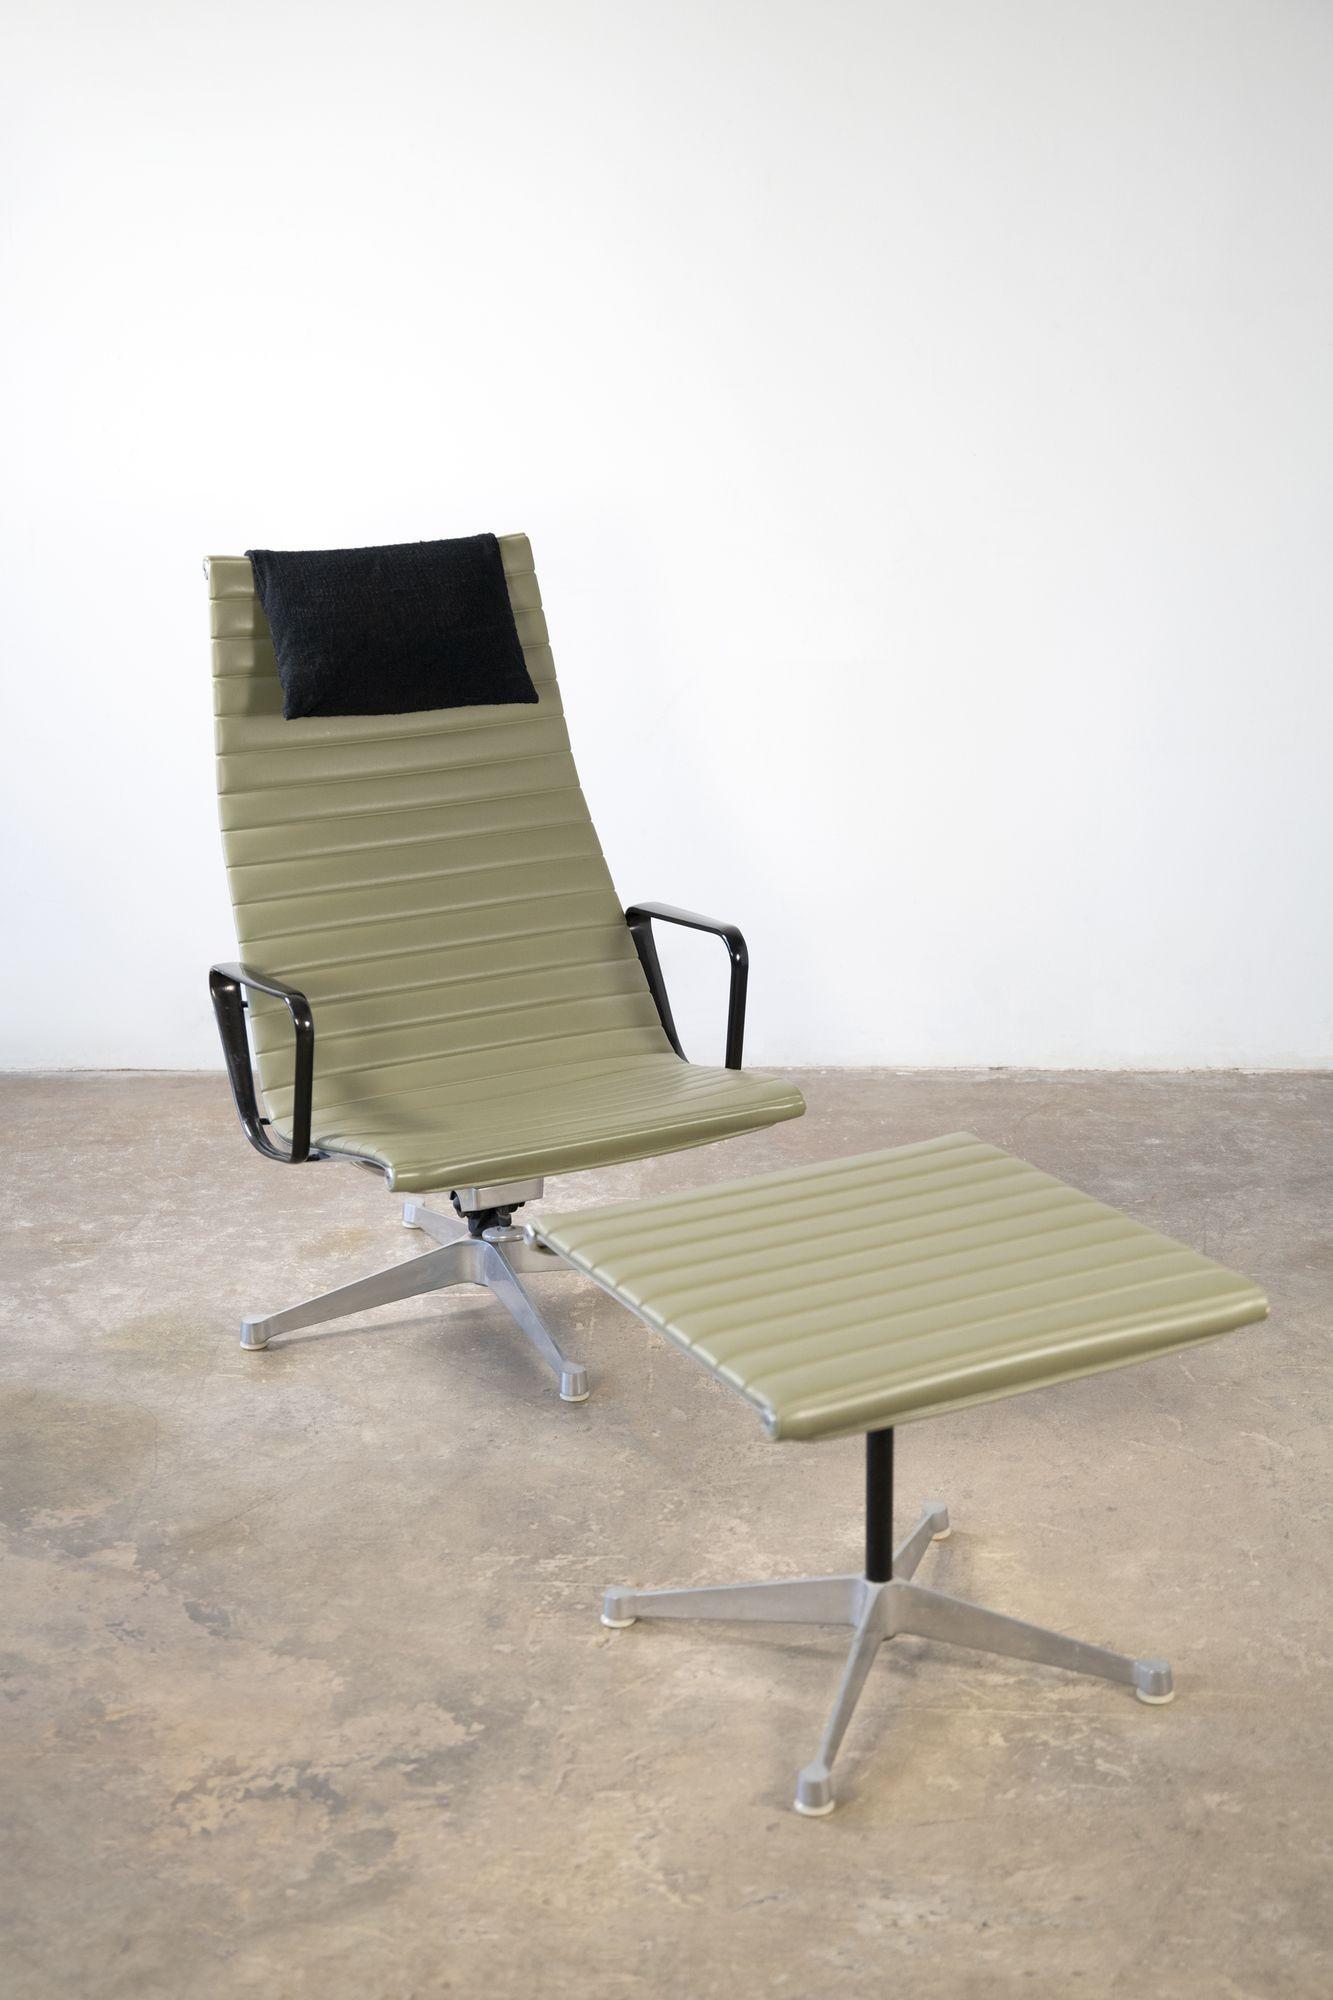 Charles and Ray Eames 'Aluminum Group' lounge chair model EA124 and ottoman model EA125.
This is an early production one-owner example that has been very well preserved. The moss green is a nice contrast to the black arms and